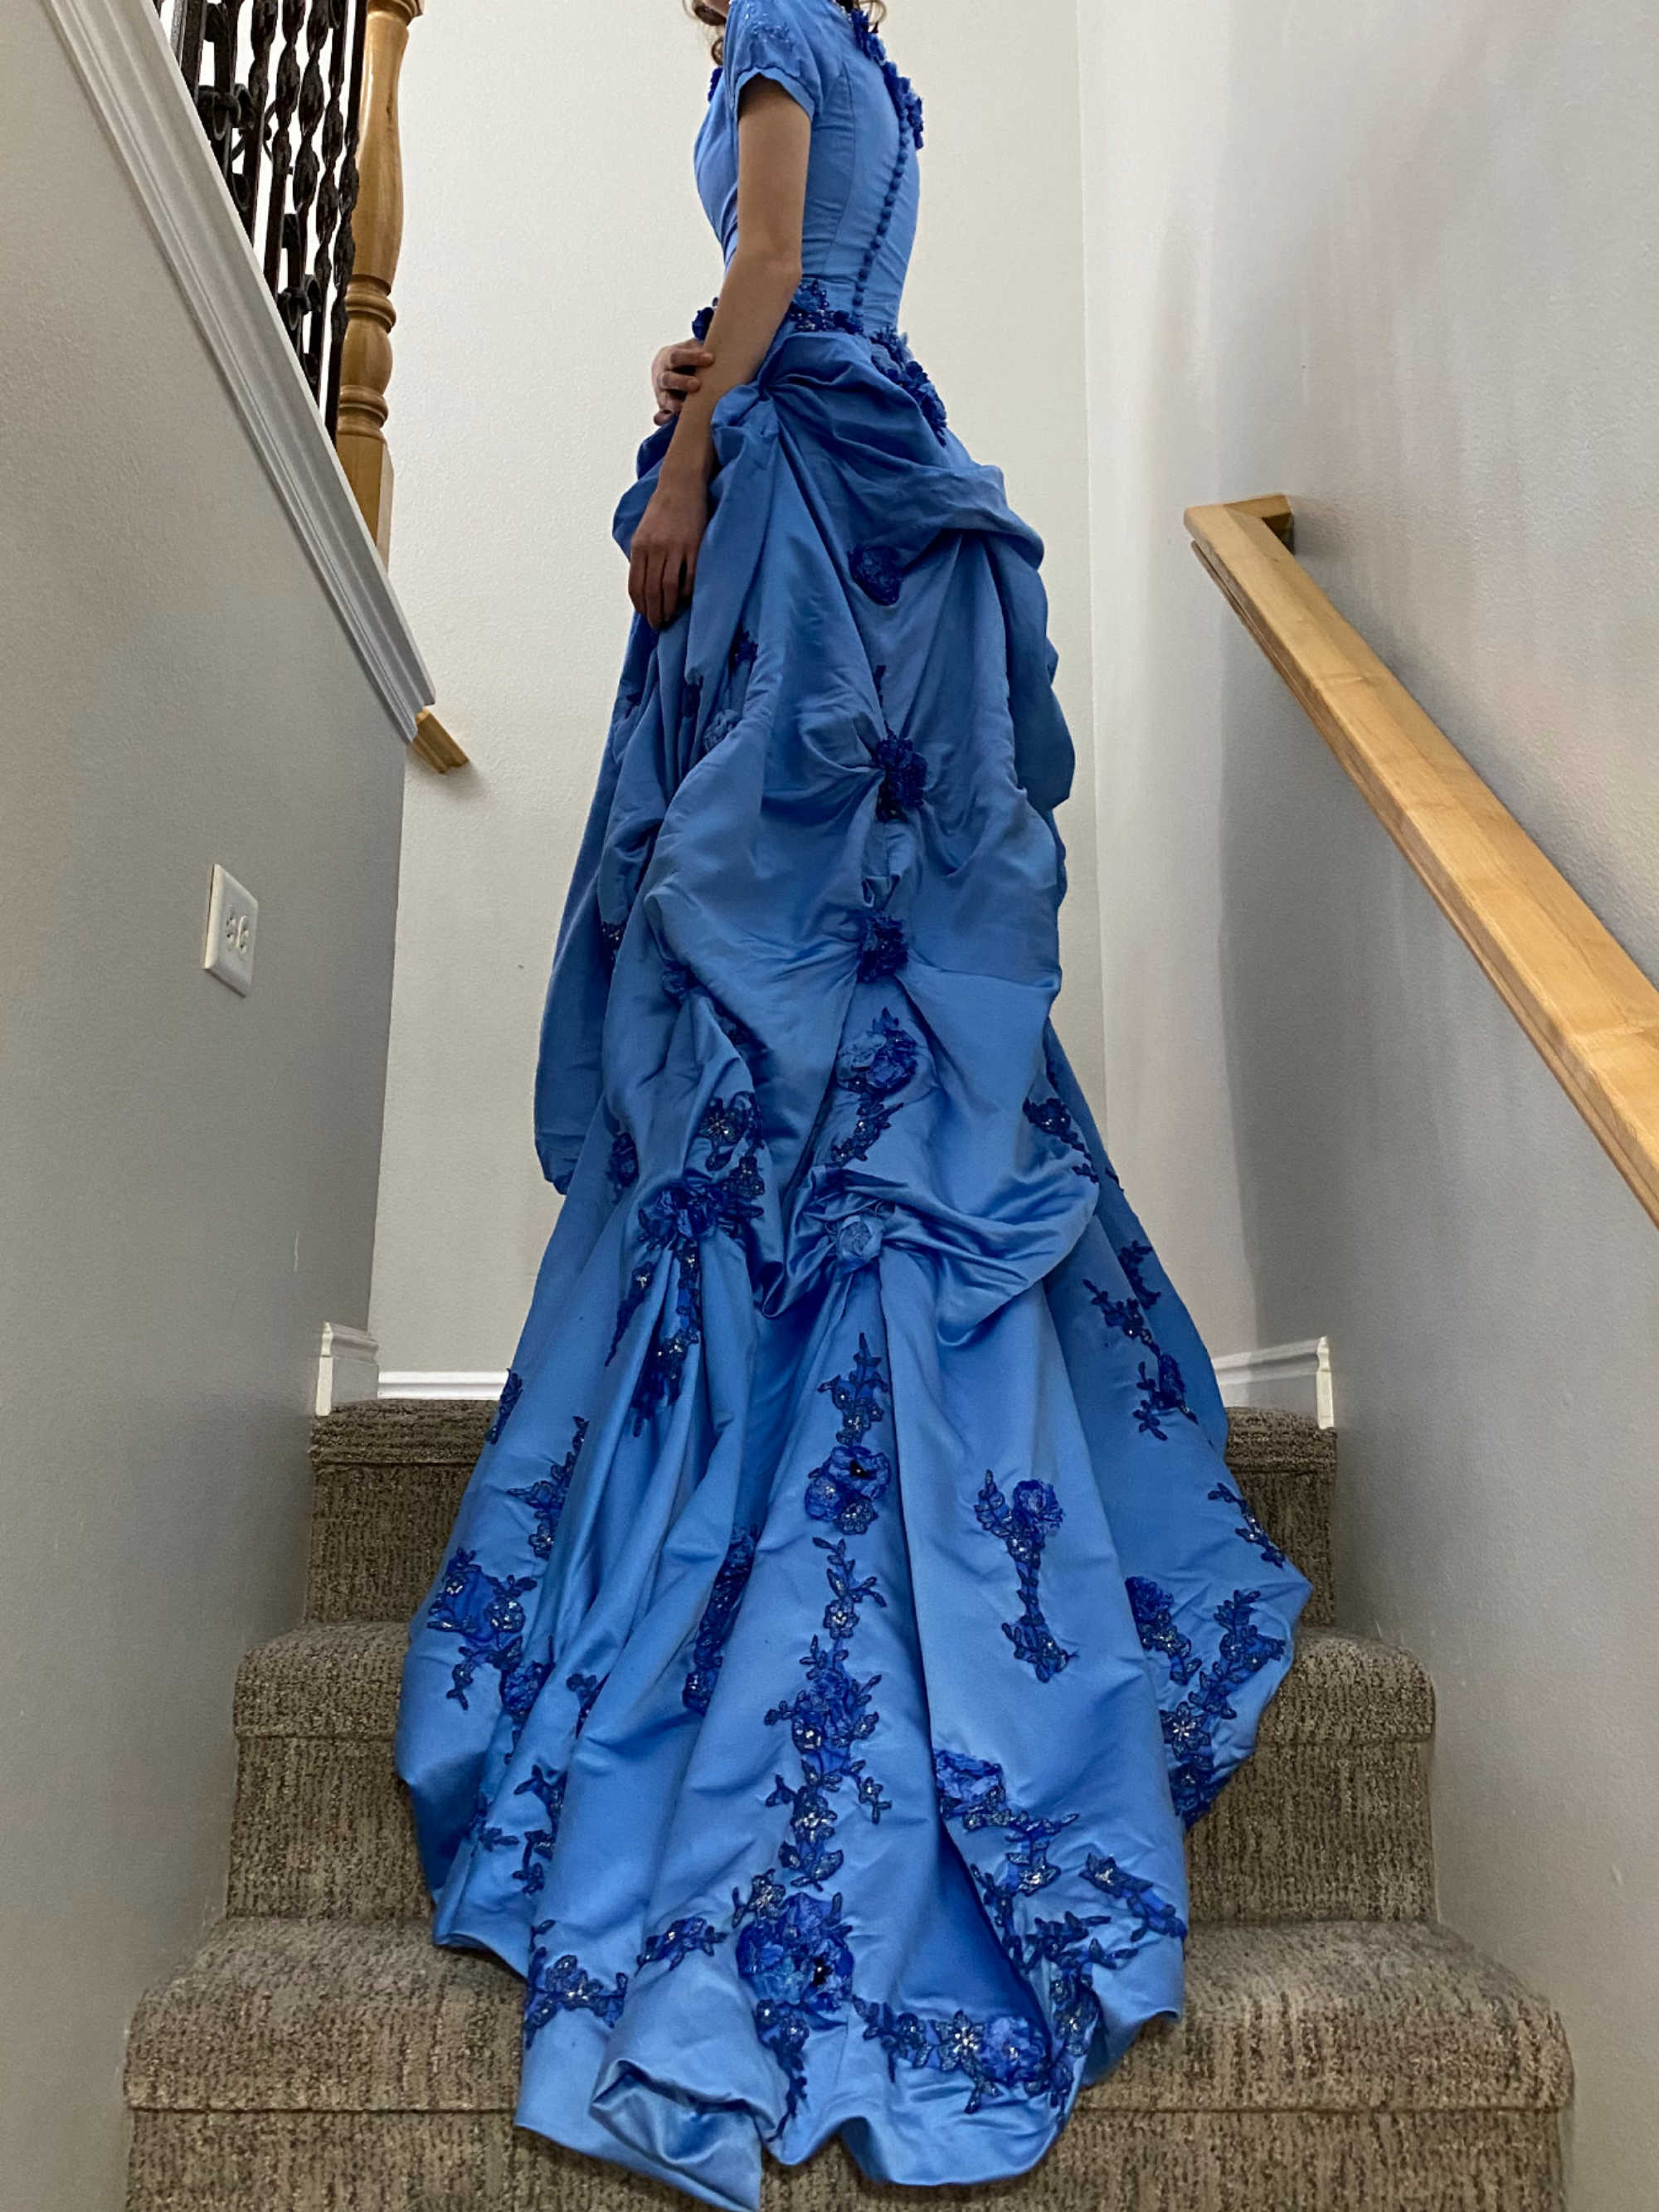 A young woman wearing a secondhand wedding dress from DI that has been dyed blue for Prom. The young woman stands at the top of a staircase to show off the long train of the dress.